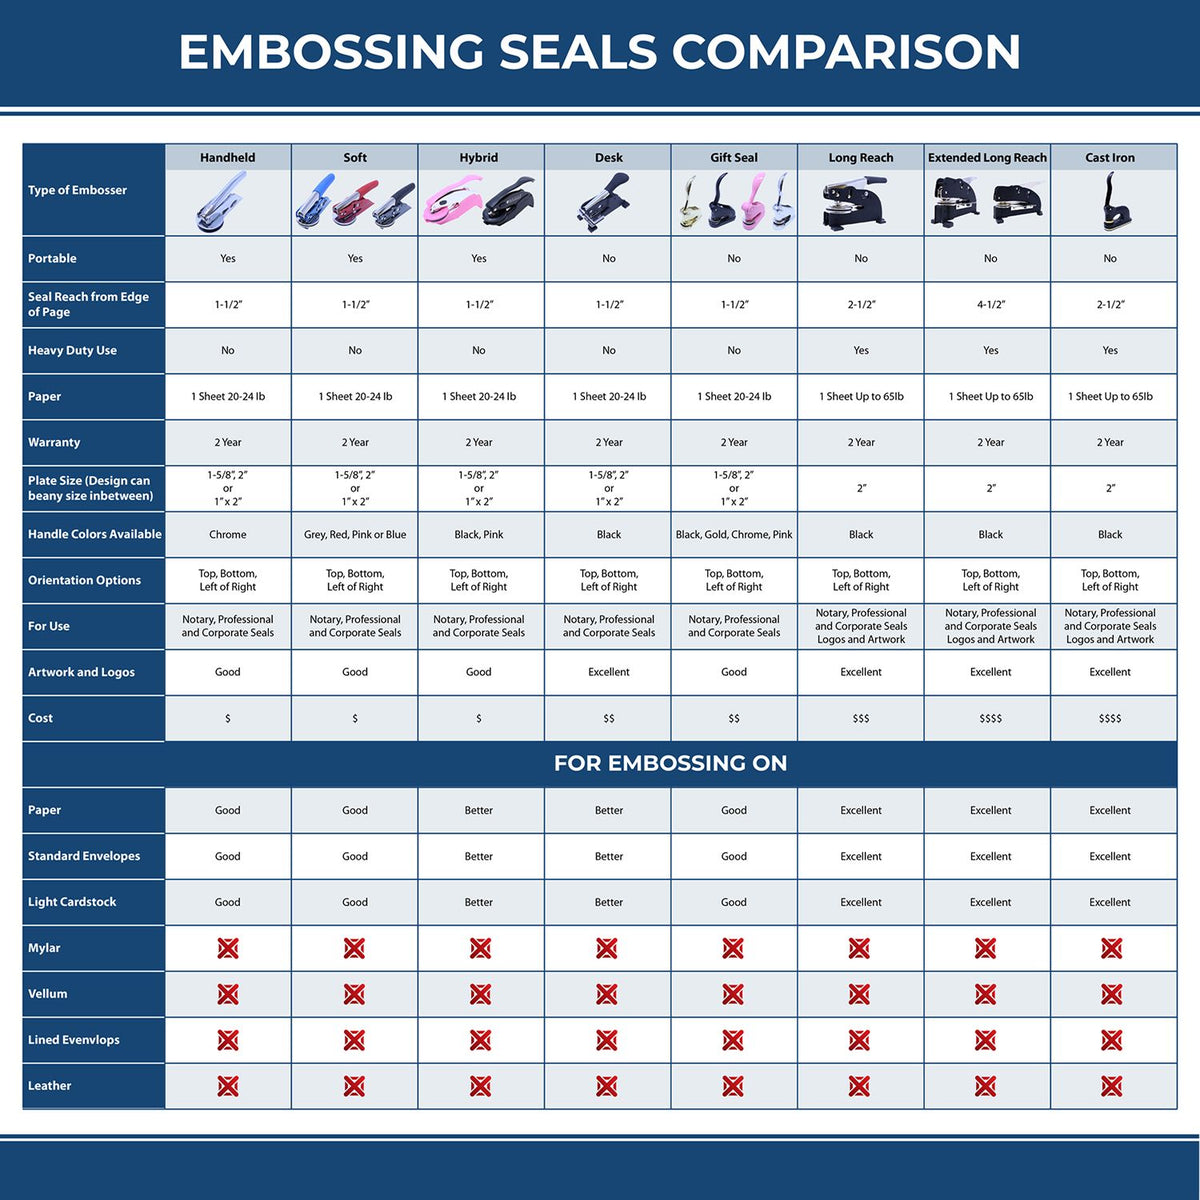 A comparison chart for the different types of mount models available for the Handheld Maine Land Surveyor Seal.